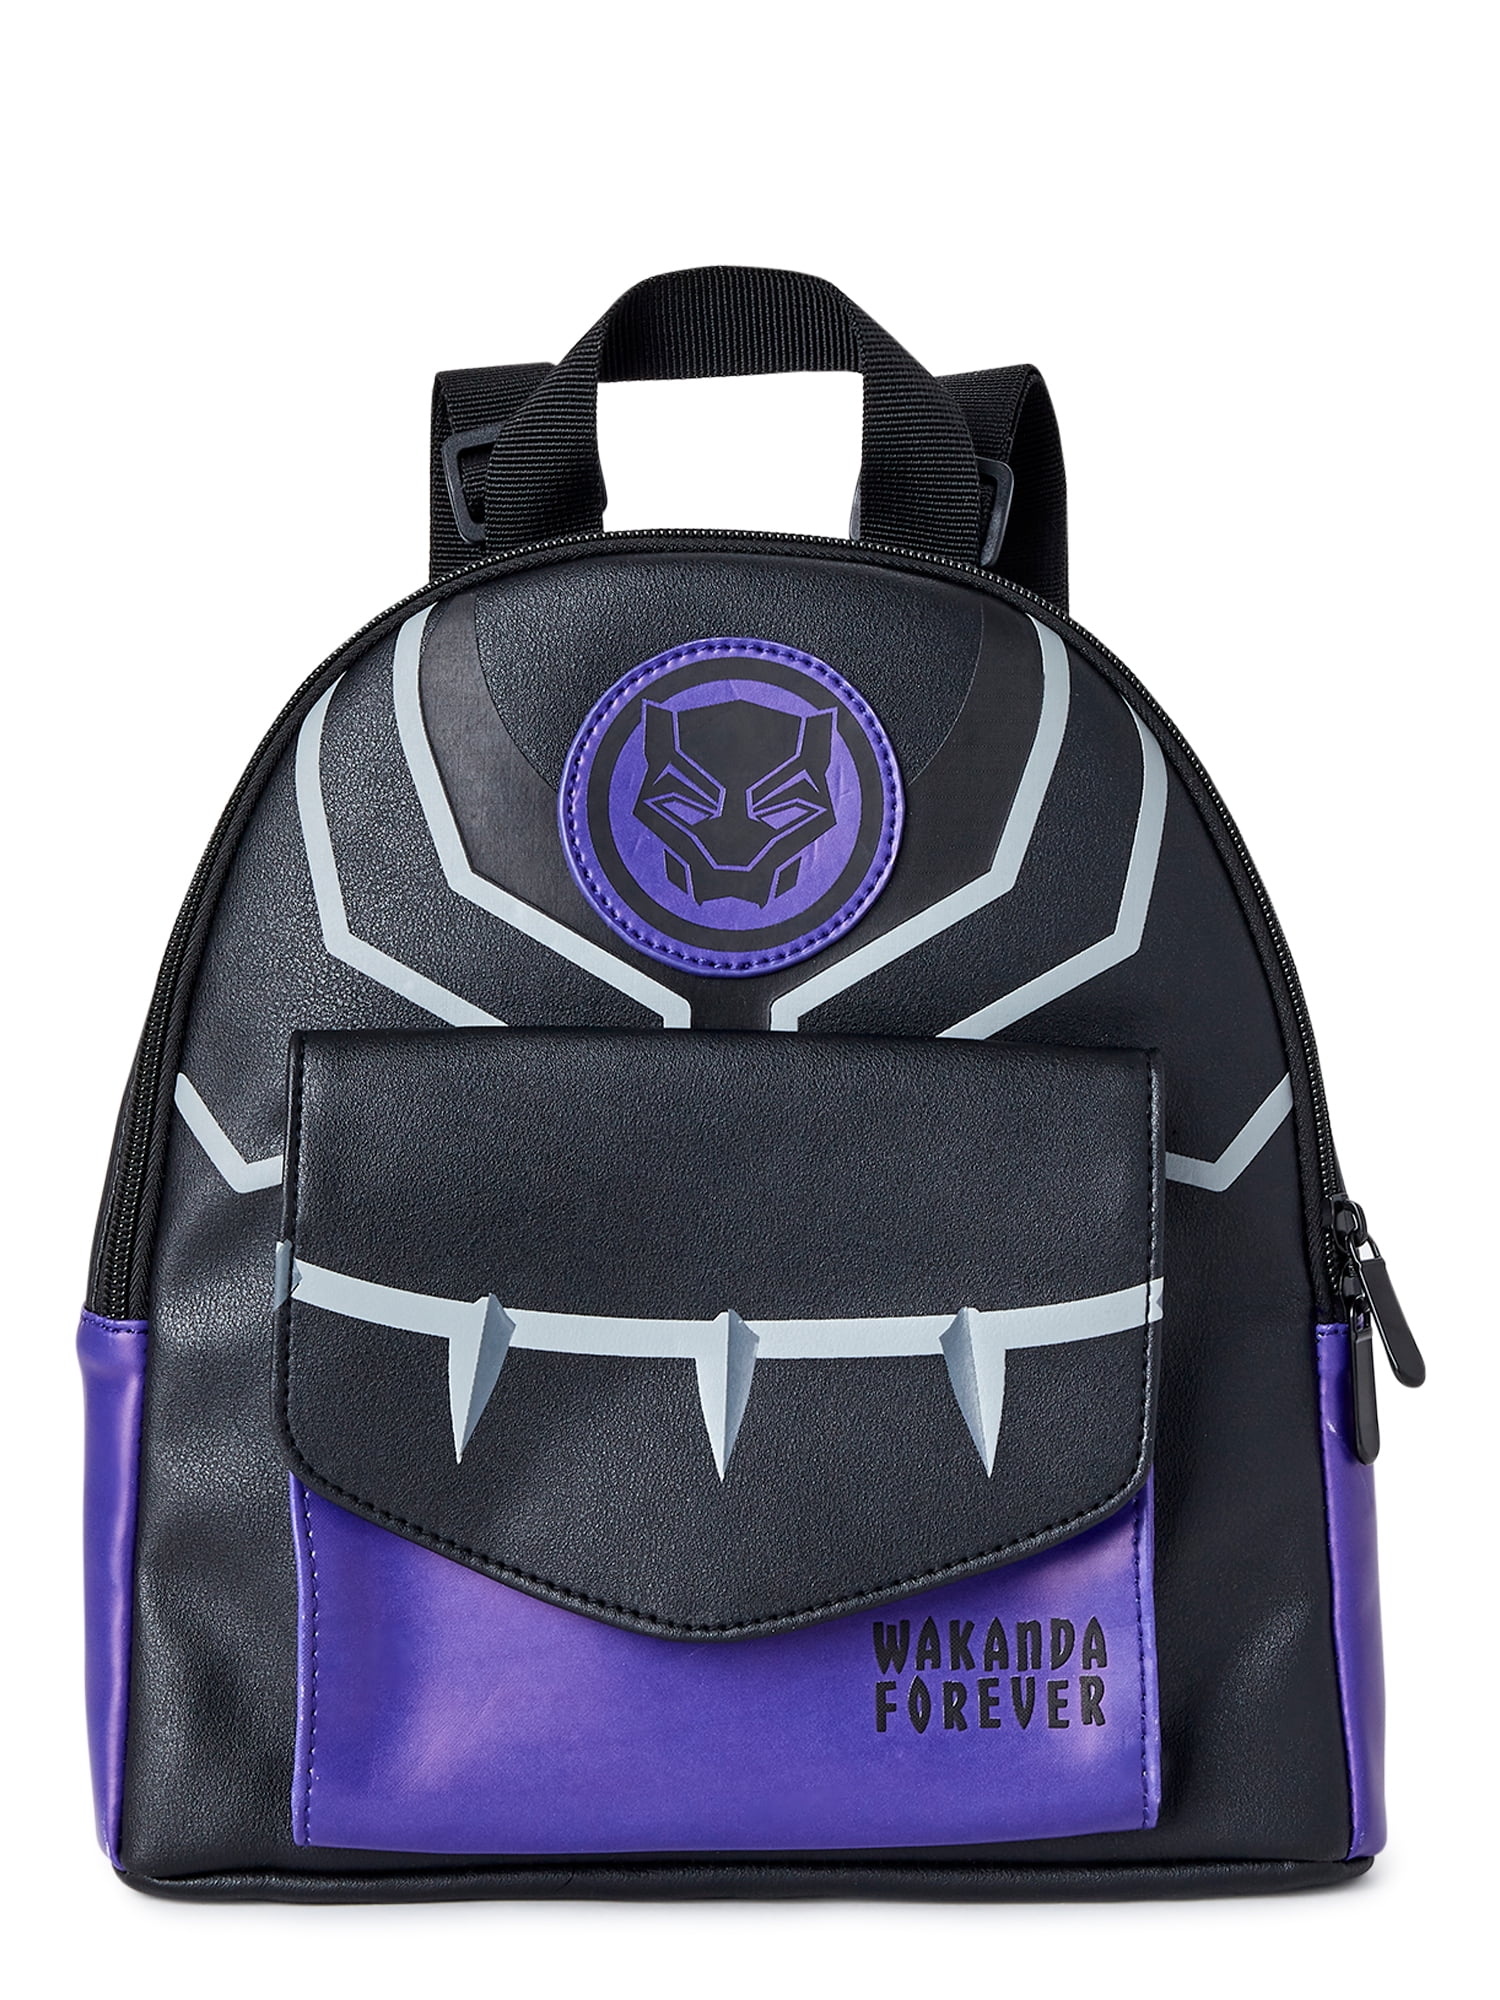 Marvel Black Panther Lunch Box Black : Amazon.ca: Home